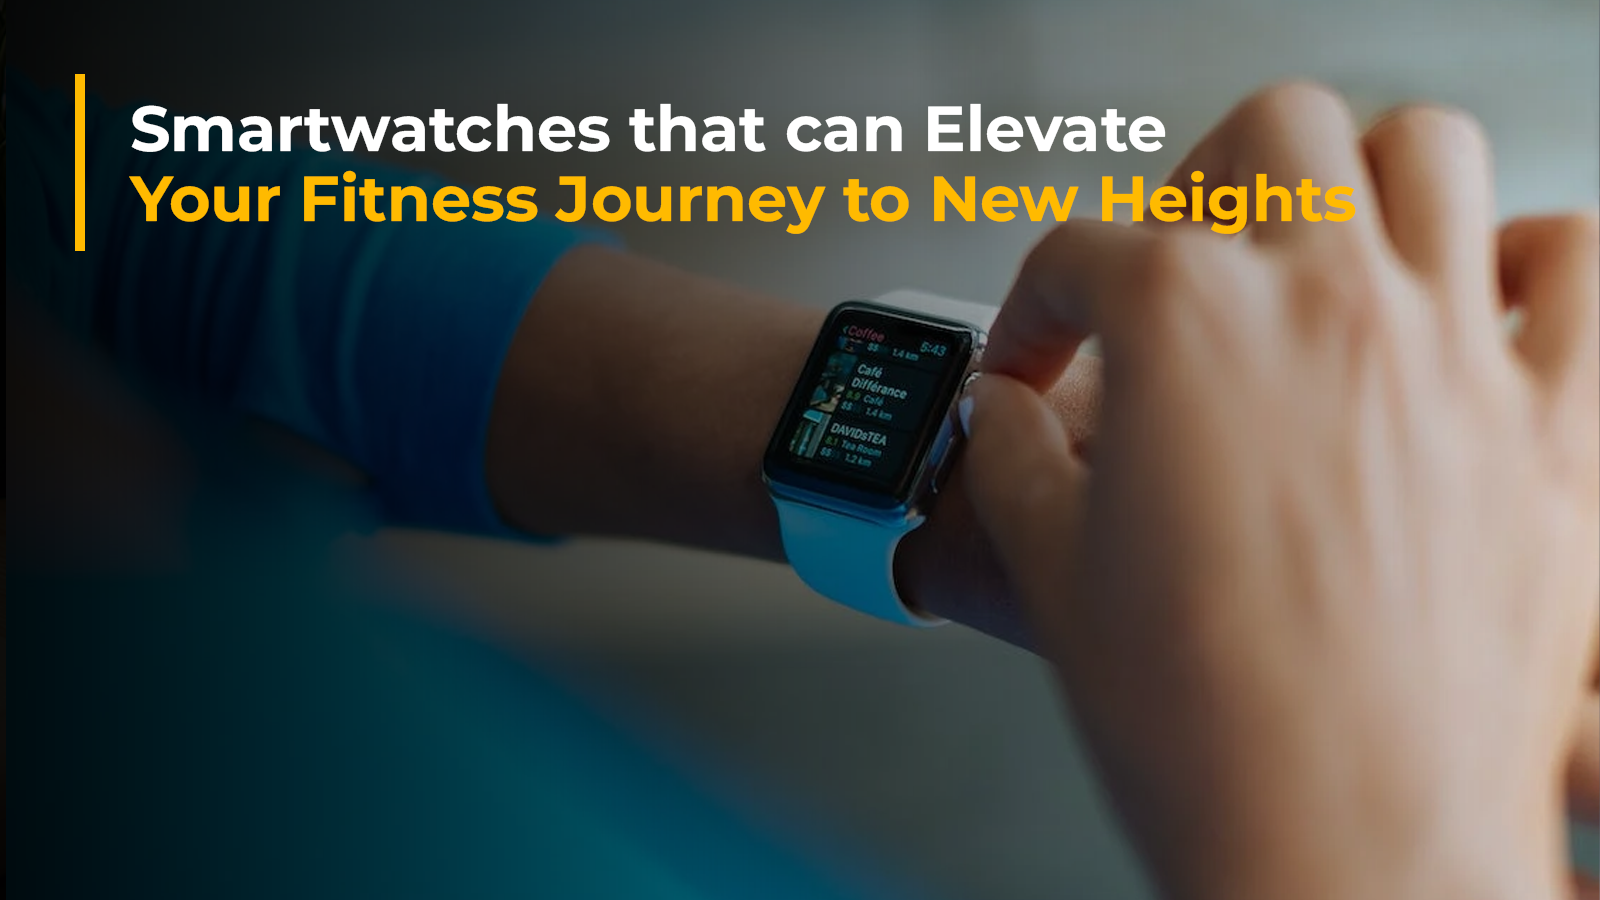 Stay Fit and Trendy: The Top 5 Smartwatches with Advanced Health and Fitness Features 